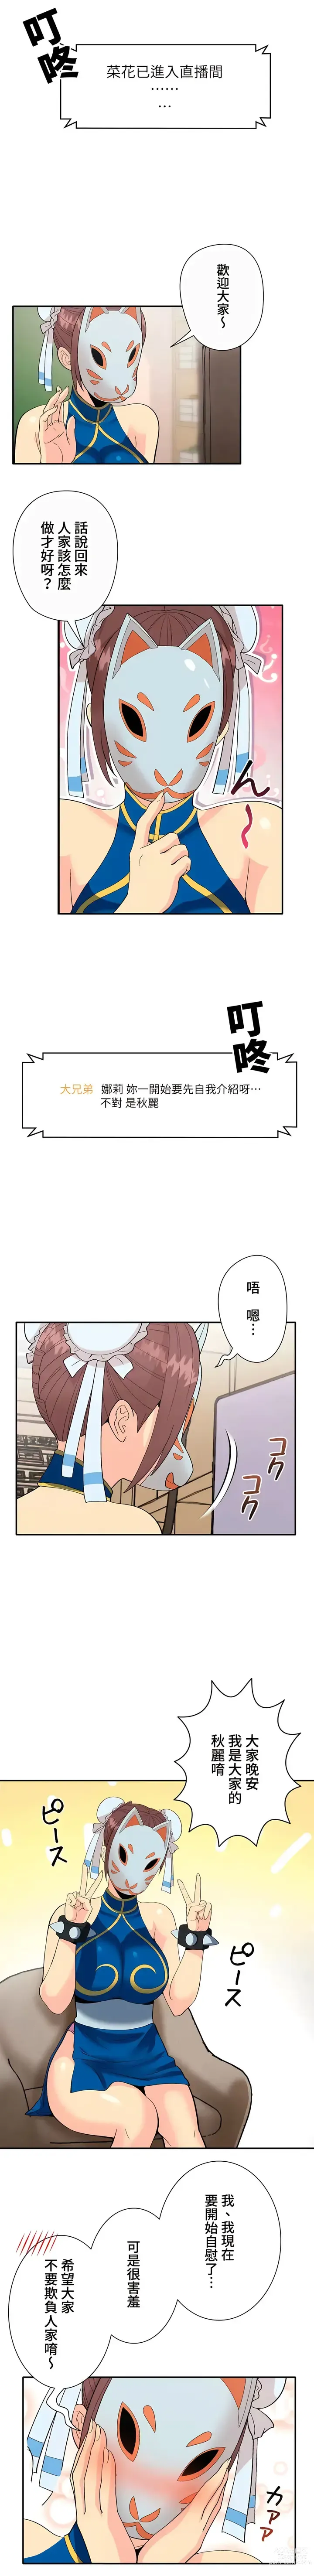 Page 20 of manga COS女孩 1-35 END